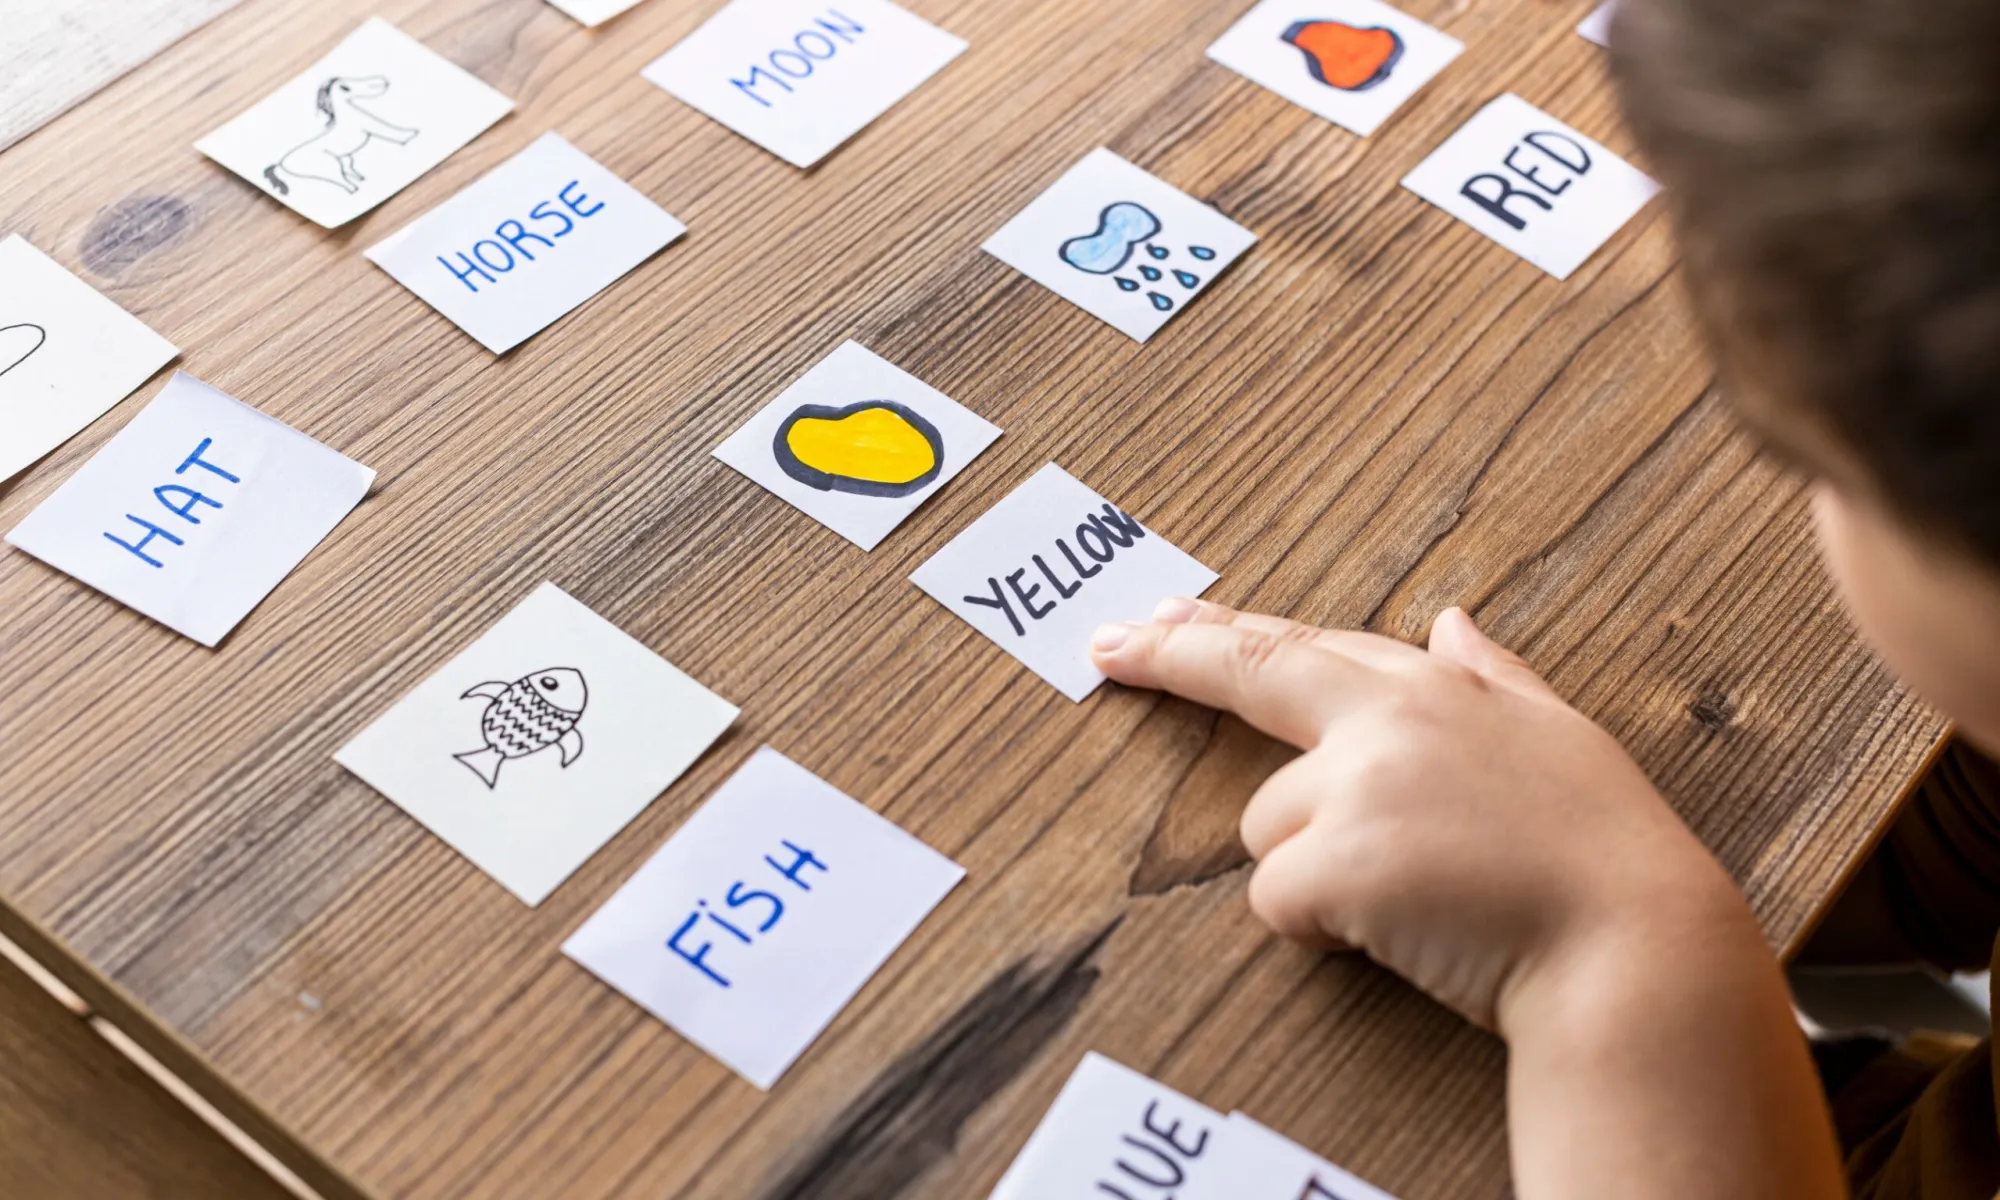 Little kid playing with cards of words and pictures